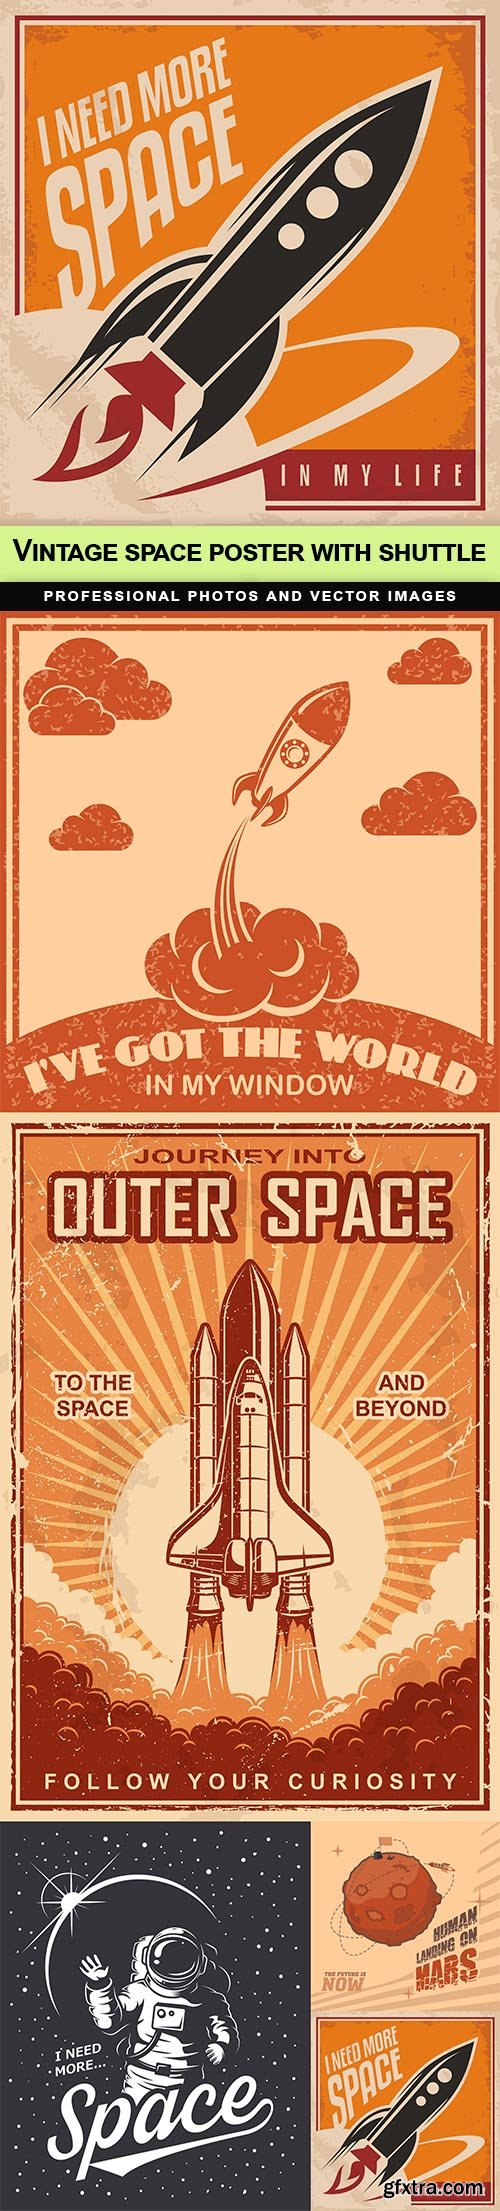 Vintage space poster with shuttle - 5 EPS